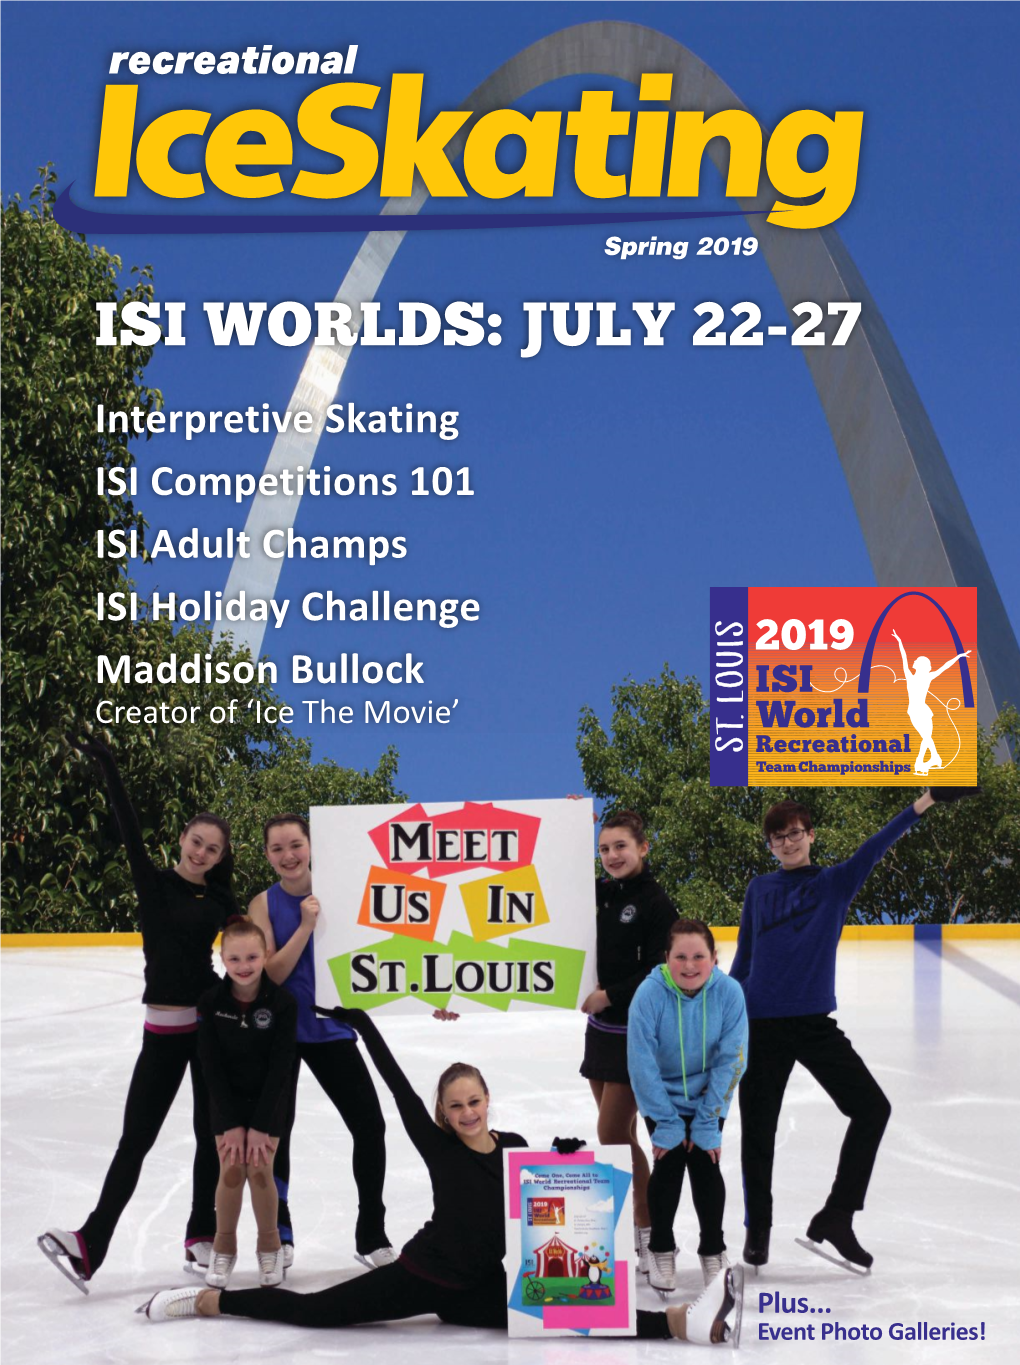 ISI WORLDS: JULY 22-27 Interpretive Skating ISI Competitions 101 ISI Adult Champs ISI Holiday Challenge Maddison Bullock Creator of ‘Ice the Movie’